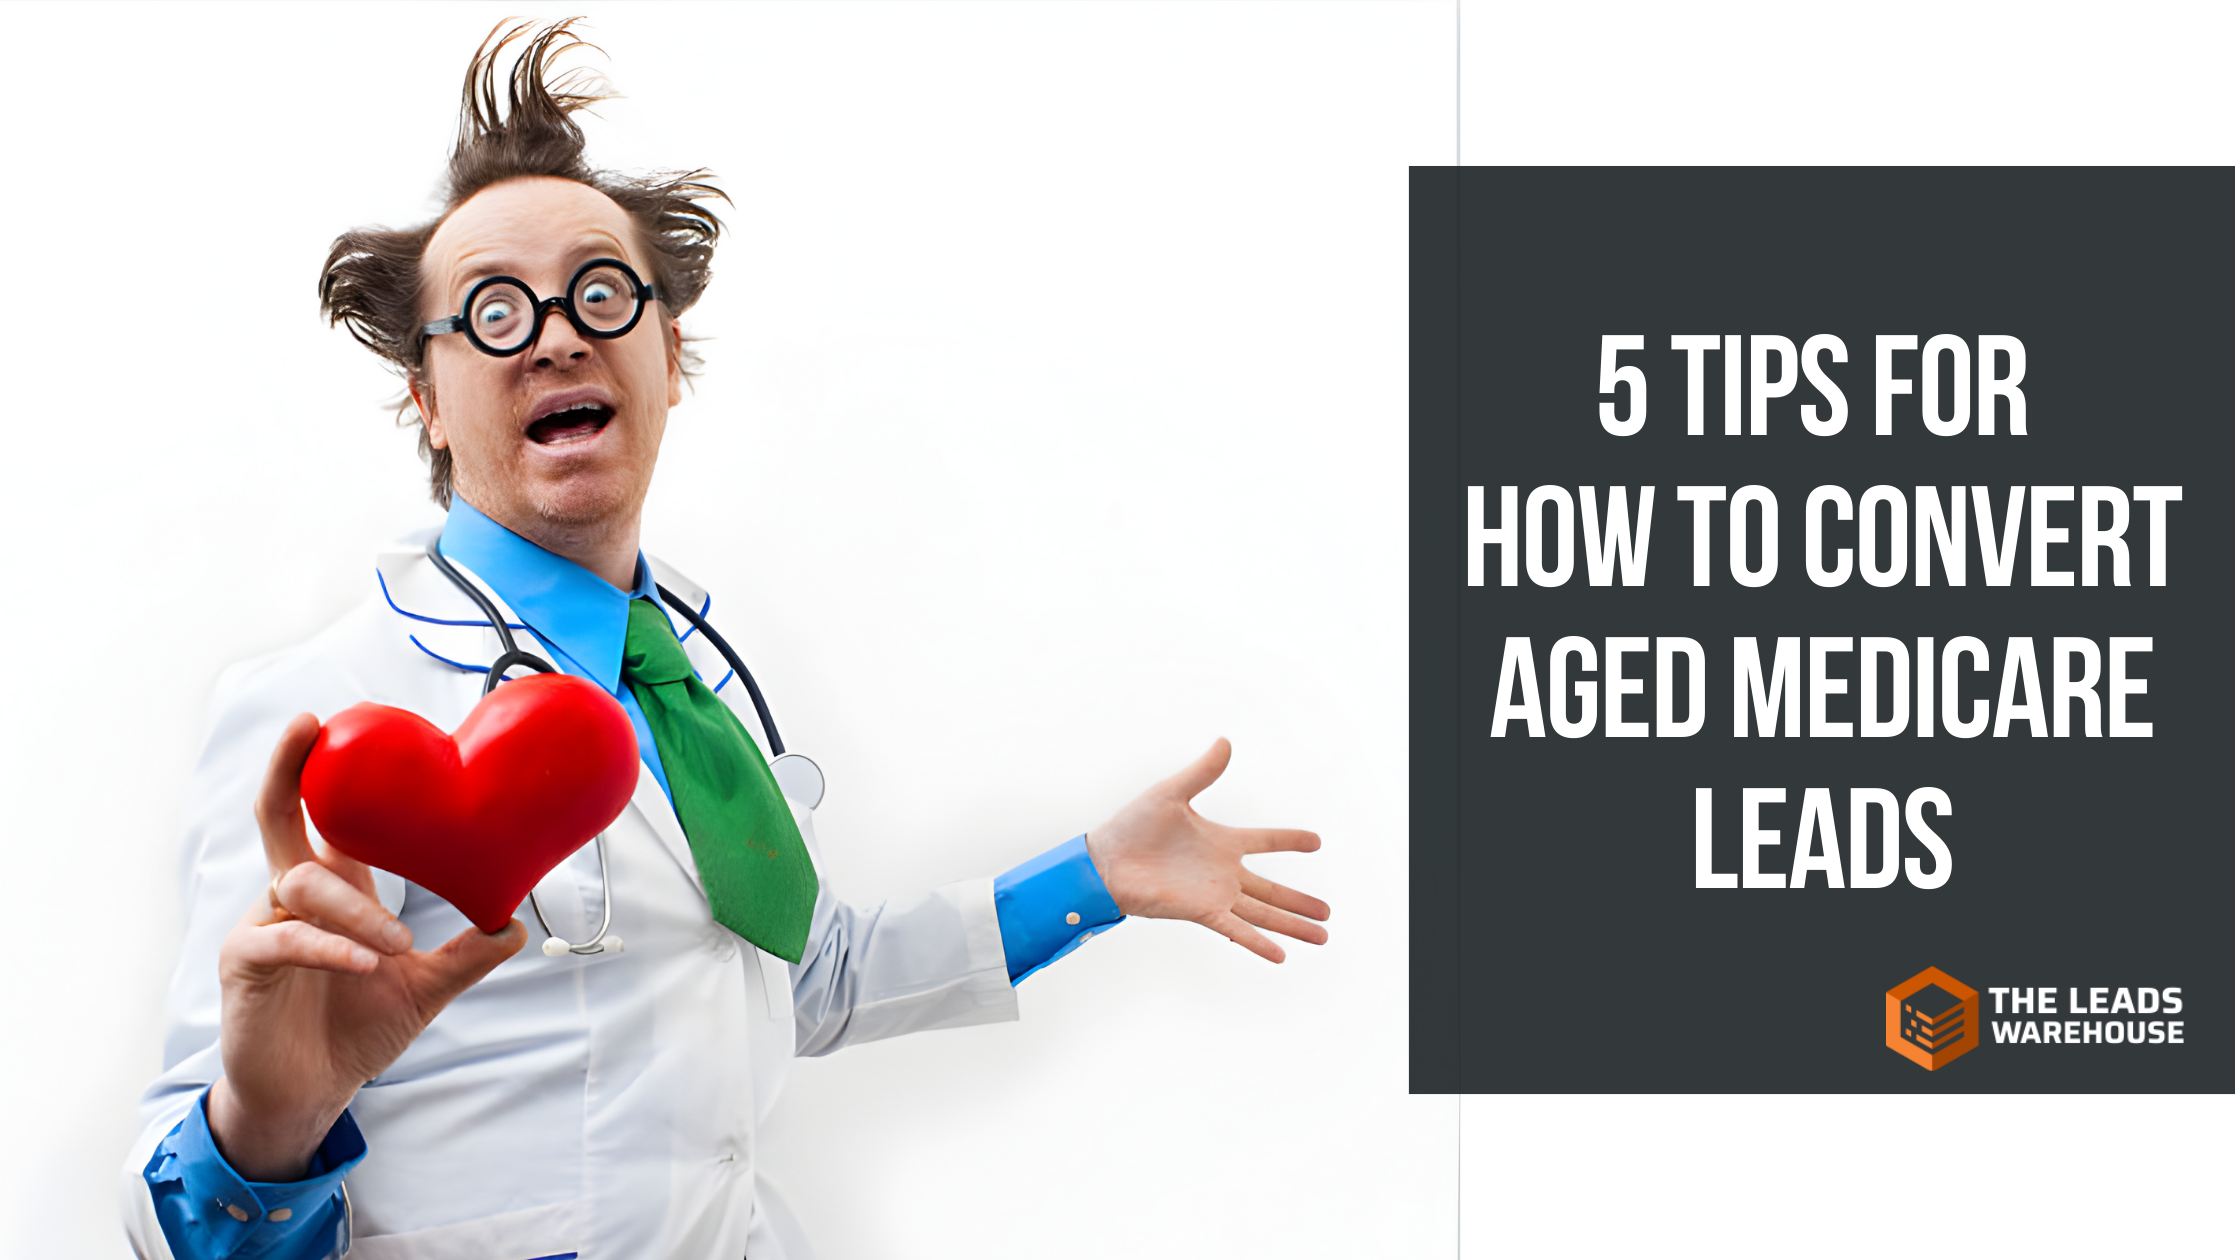 Convert Aged Medicare Leads | 5 Tips